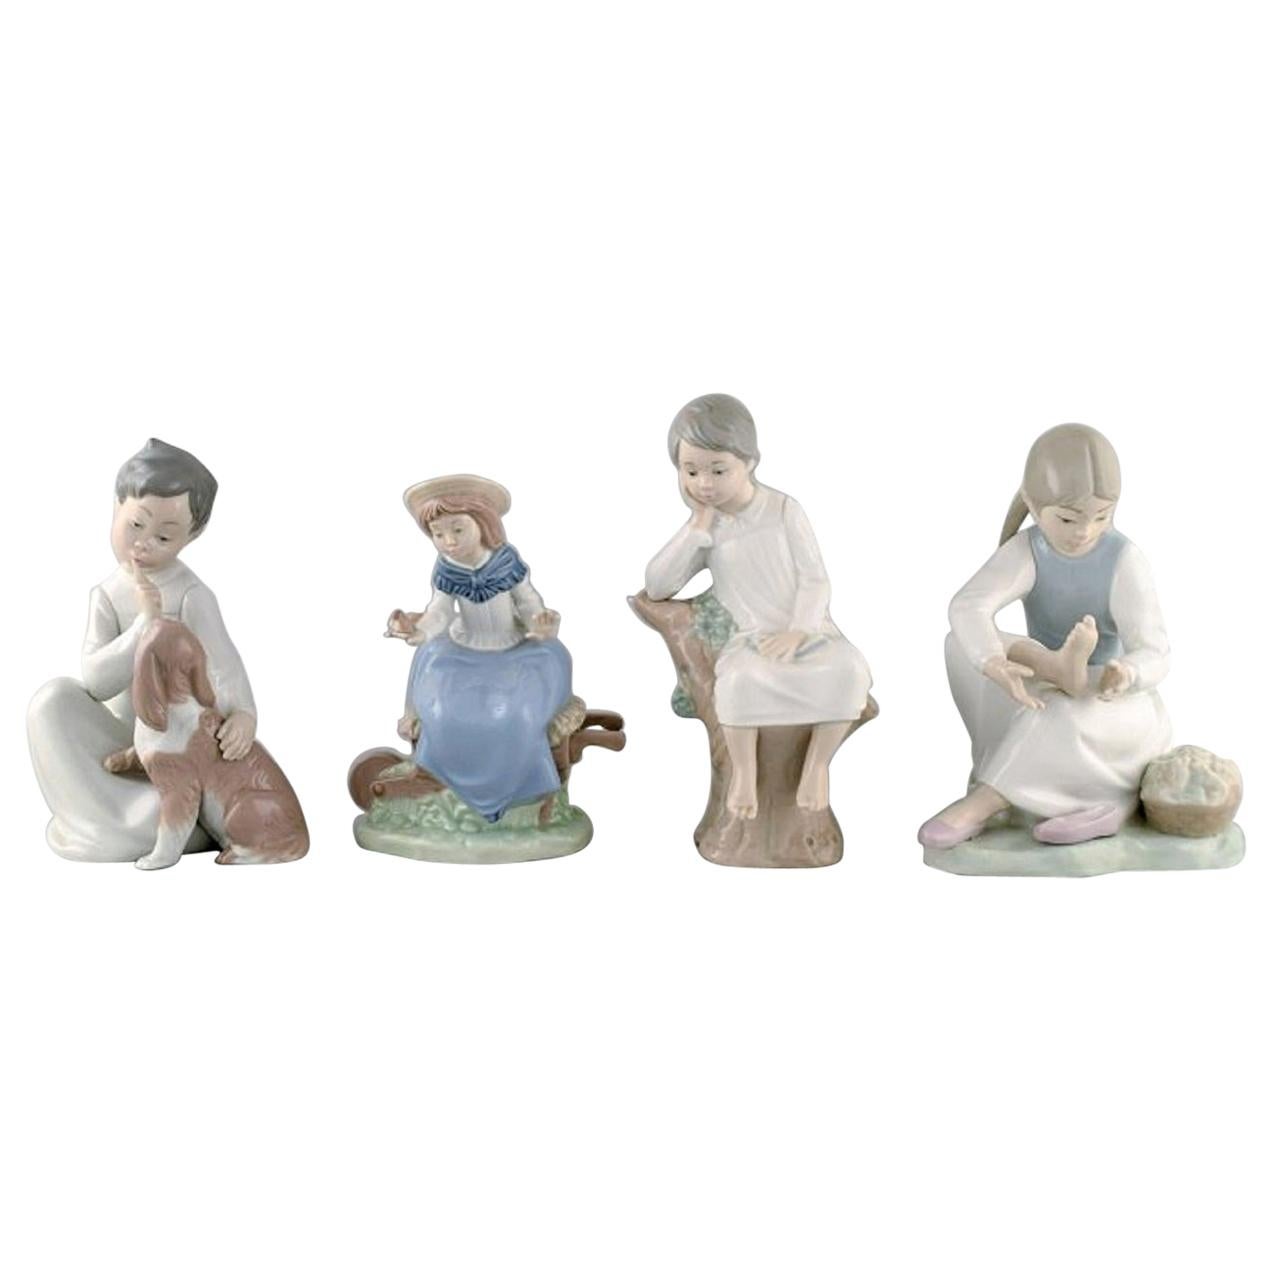 Lladro and Nao, Spain, Four Porcelain Figurines of Children, 1980s-1990s For Sale